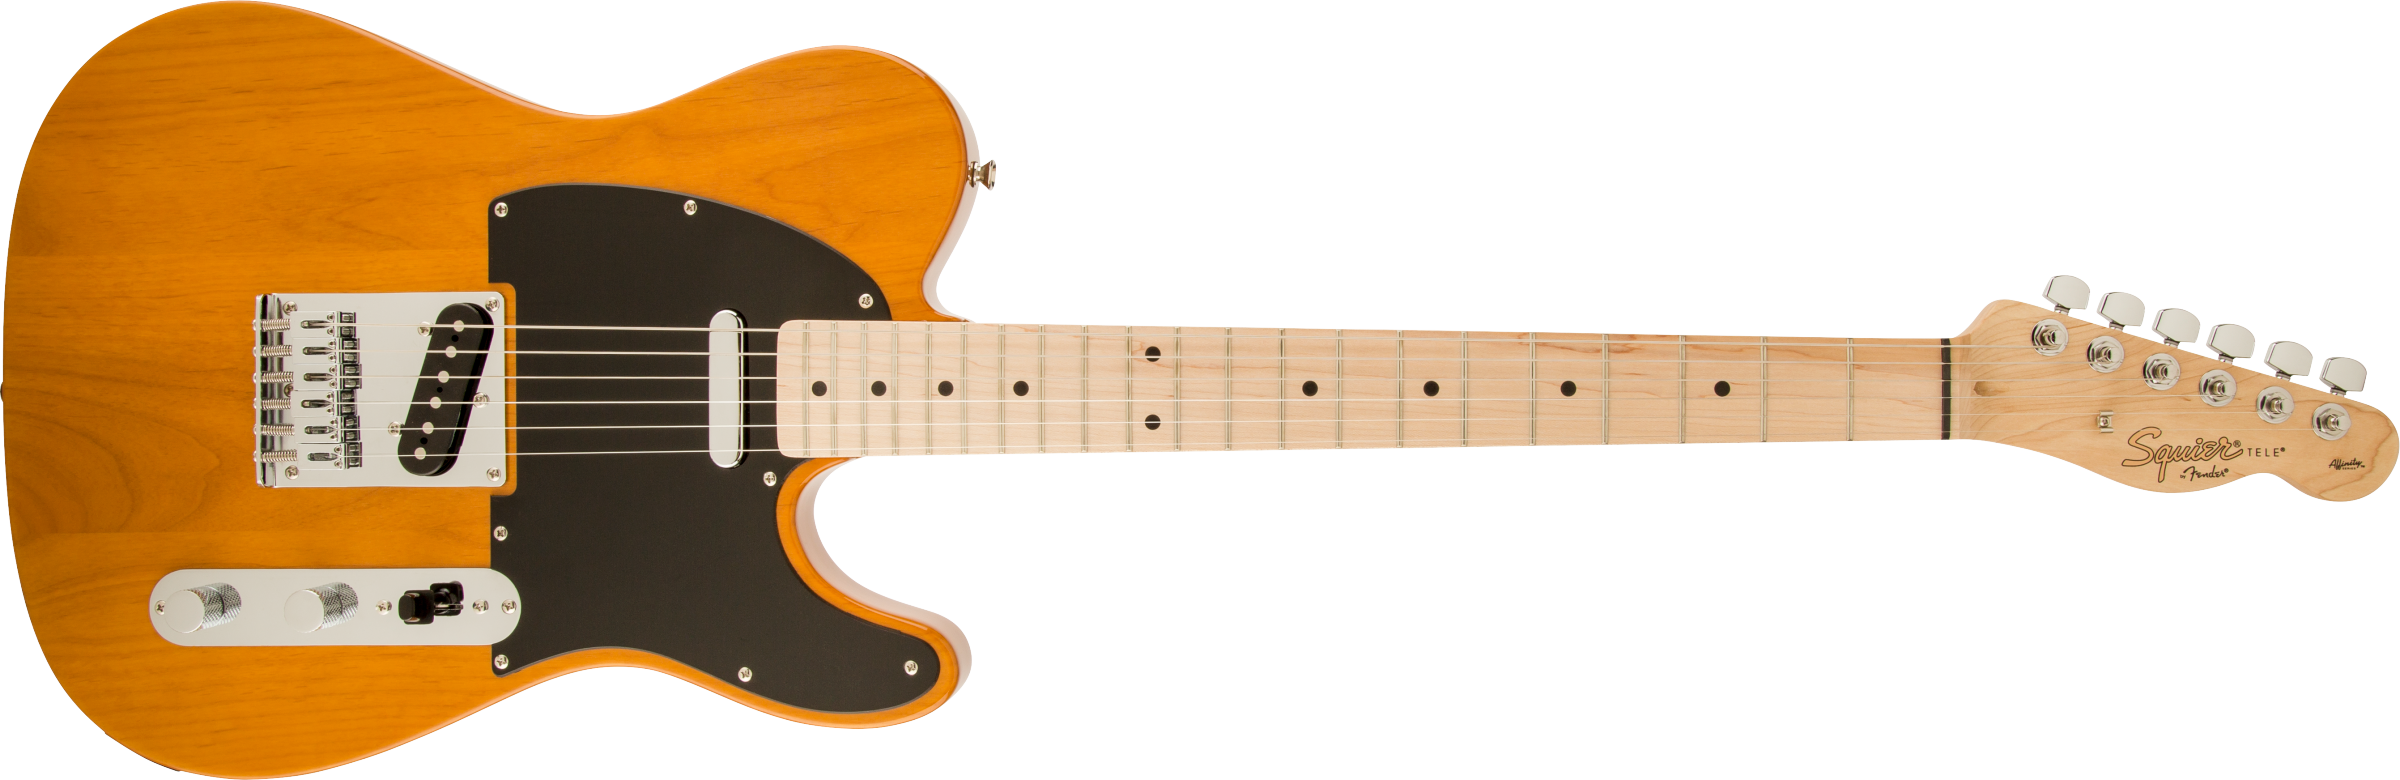 Fender Squier Affinity Series Telecaster, Maple Fingerboard, Butterscotch Blonde